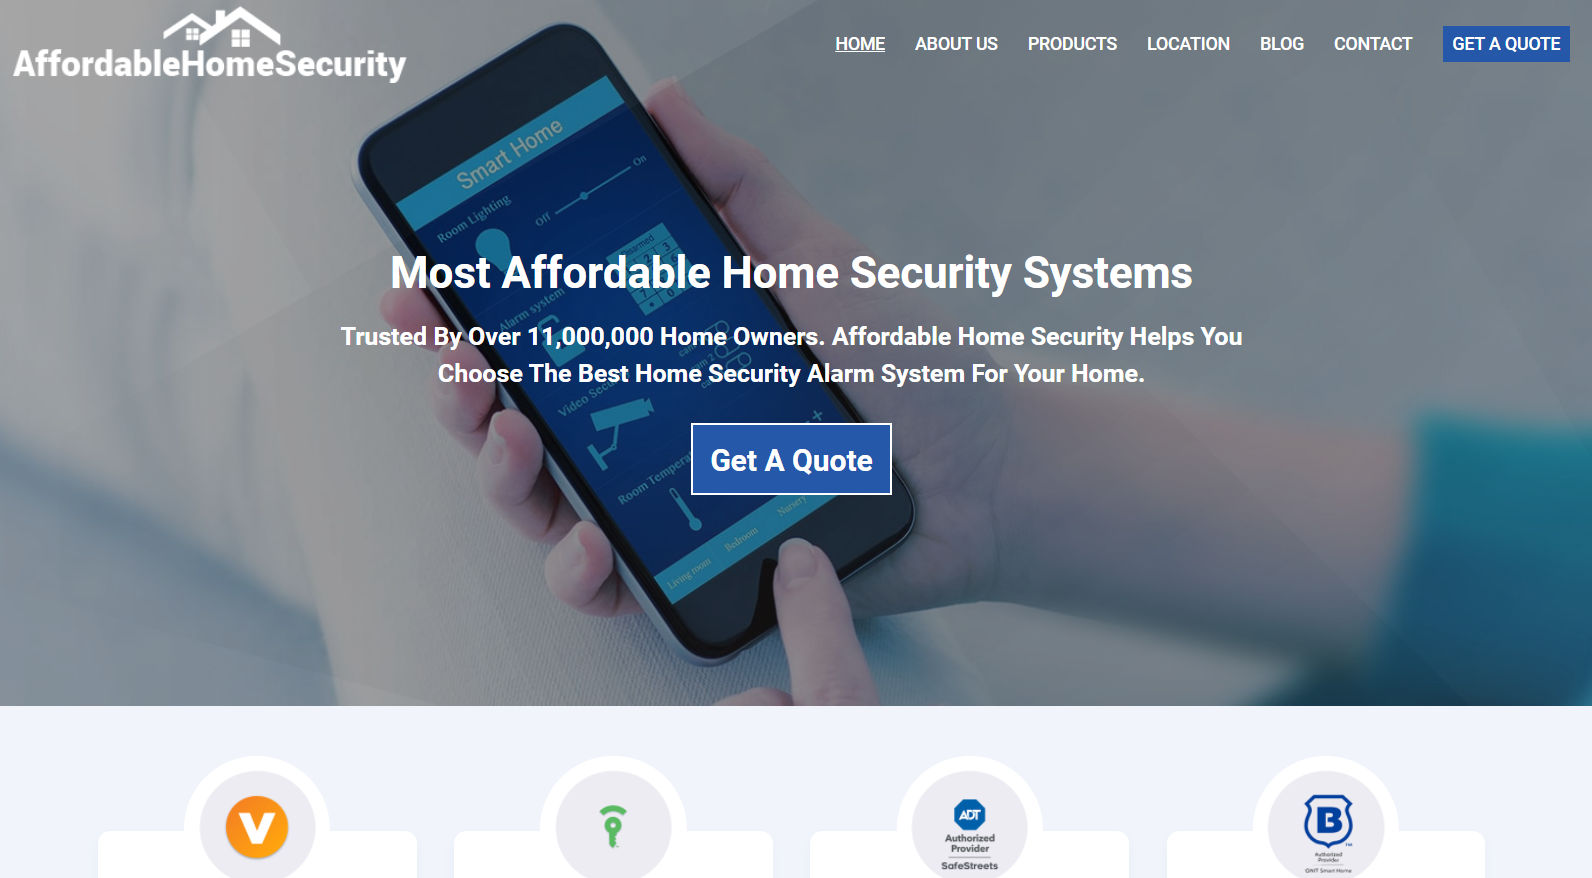 Affordable Home Security